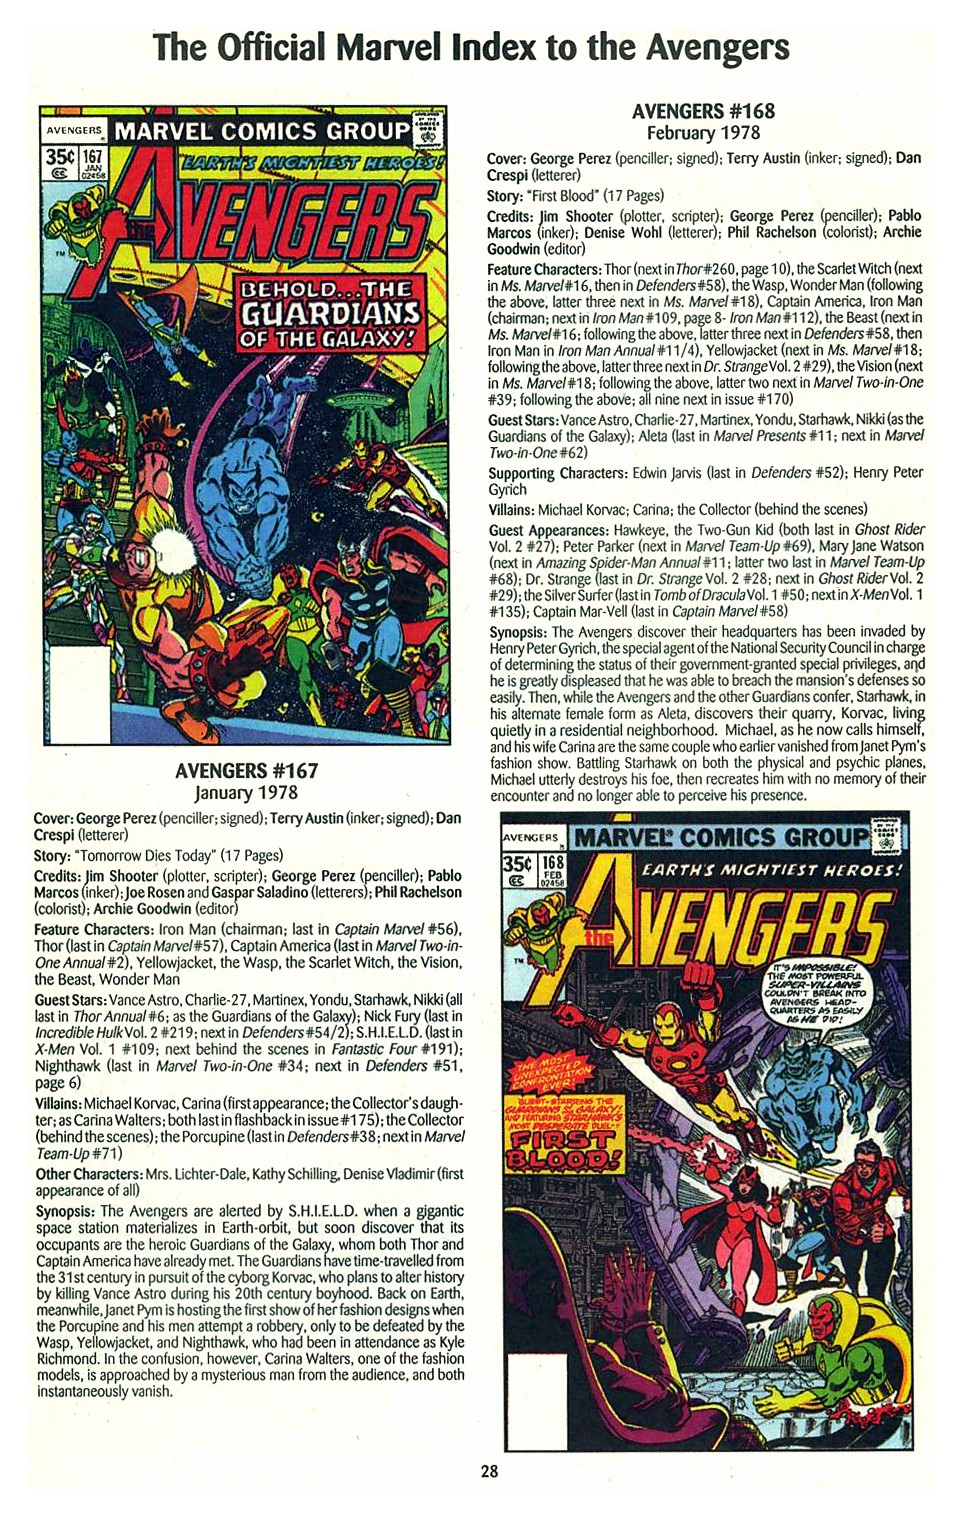 Read online The Official Marvel Index to the Avengers comic -  Issue #3 - 30